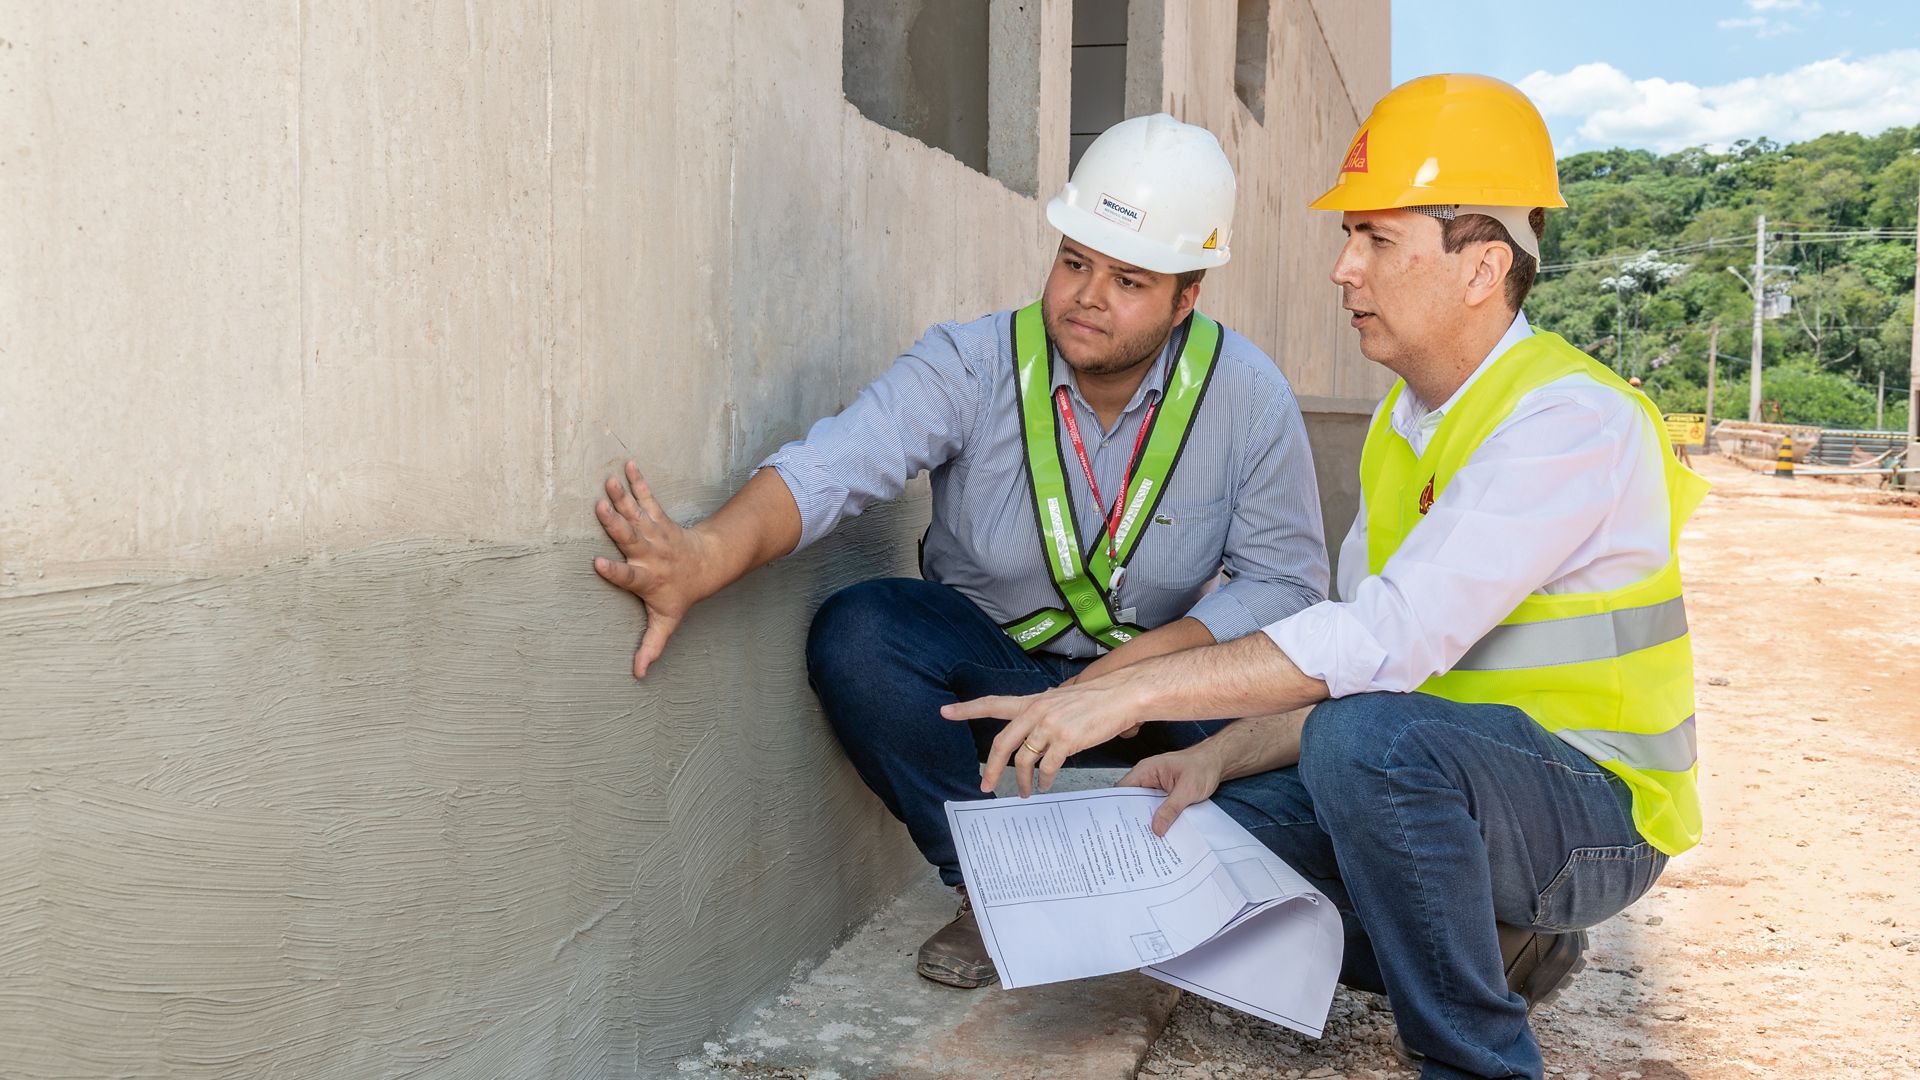 Advising the client on the building site